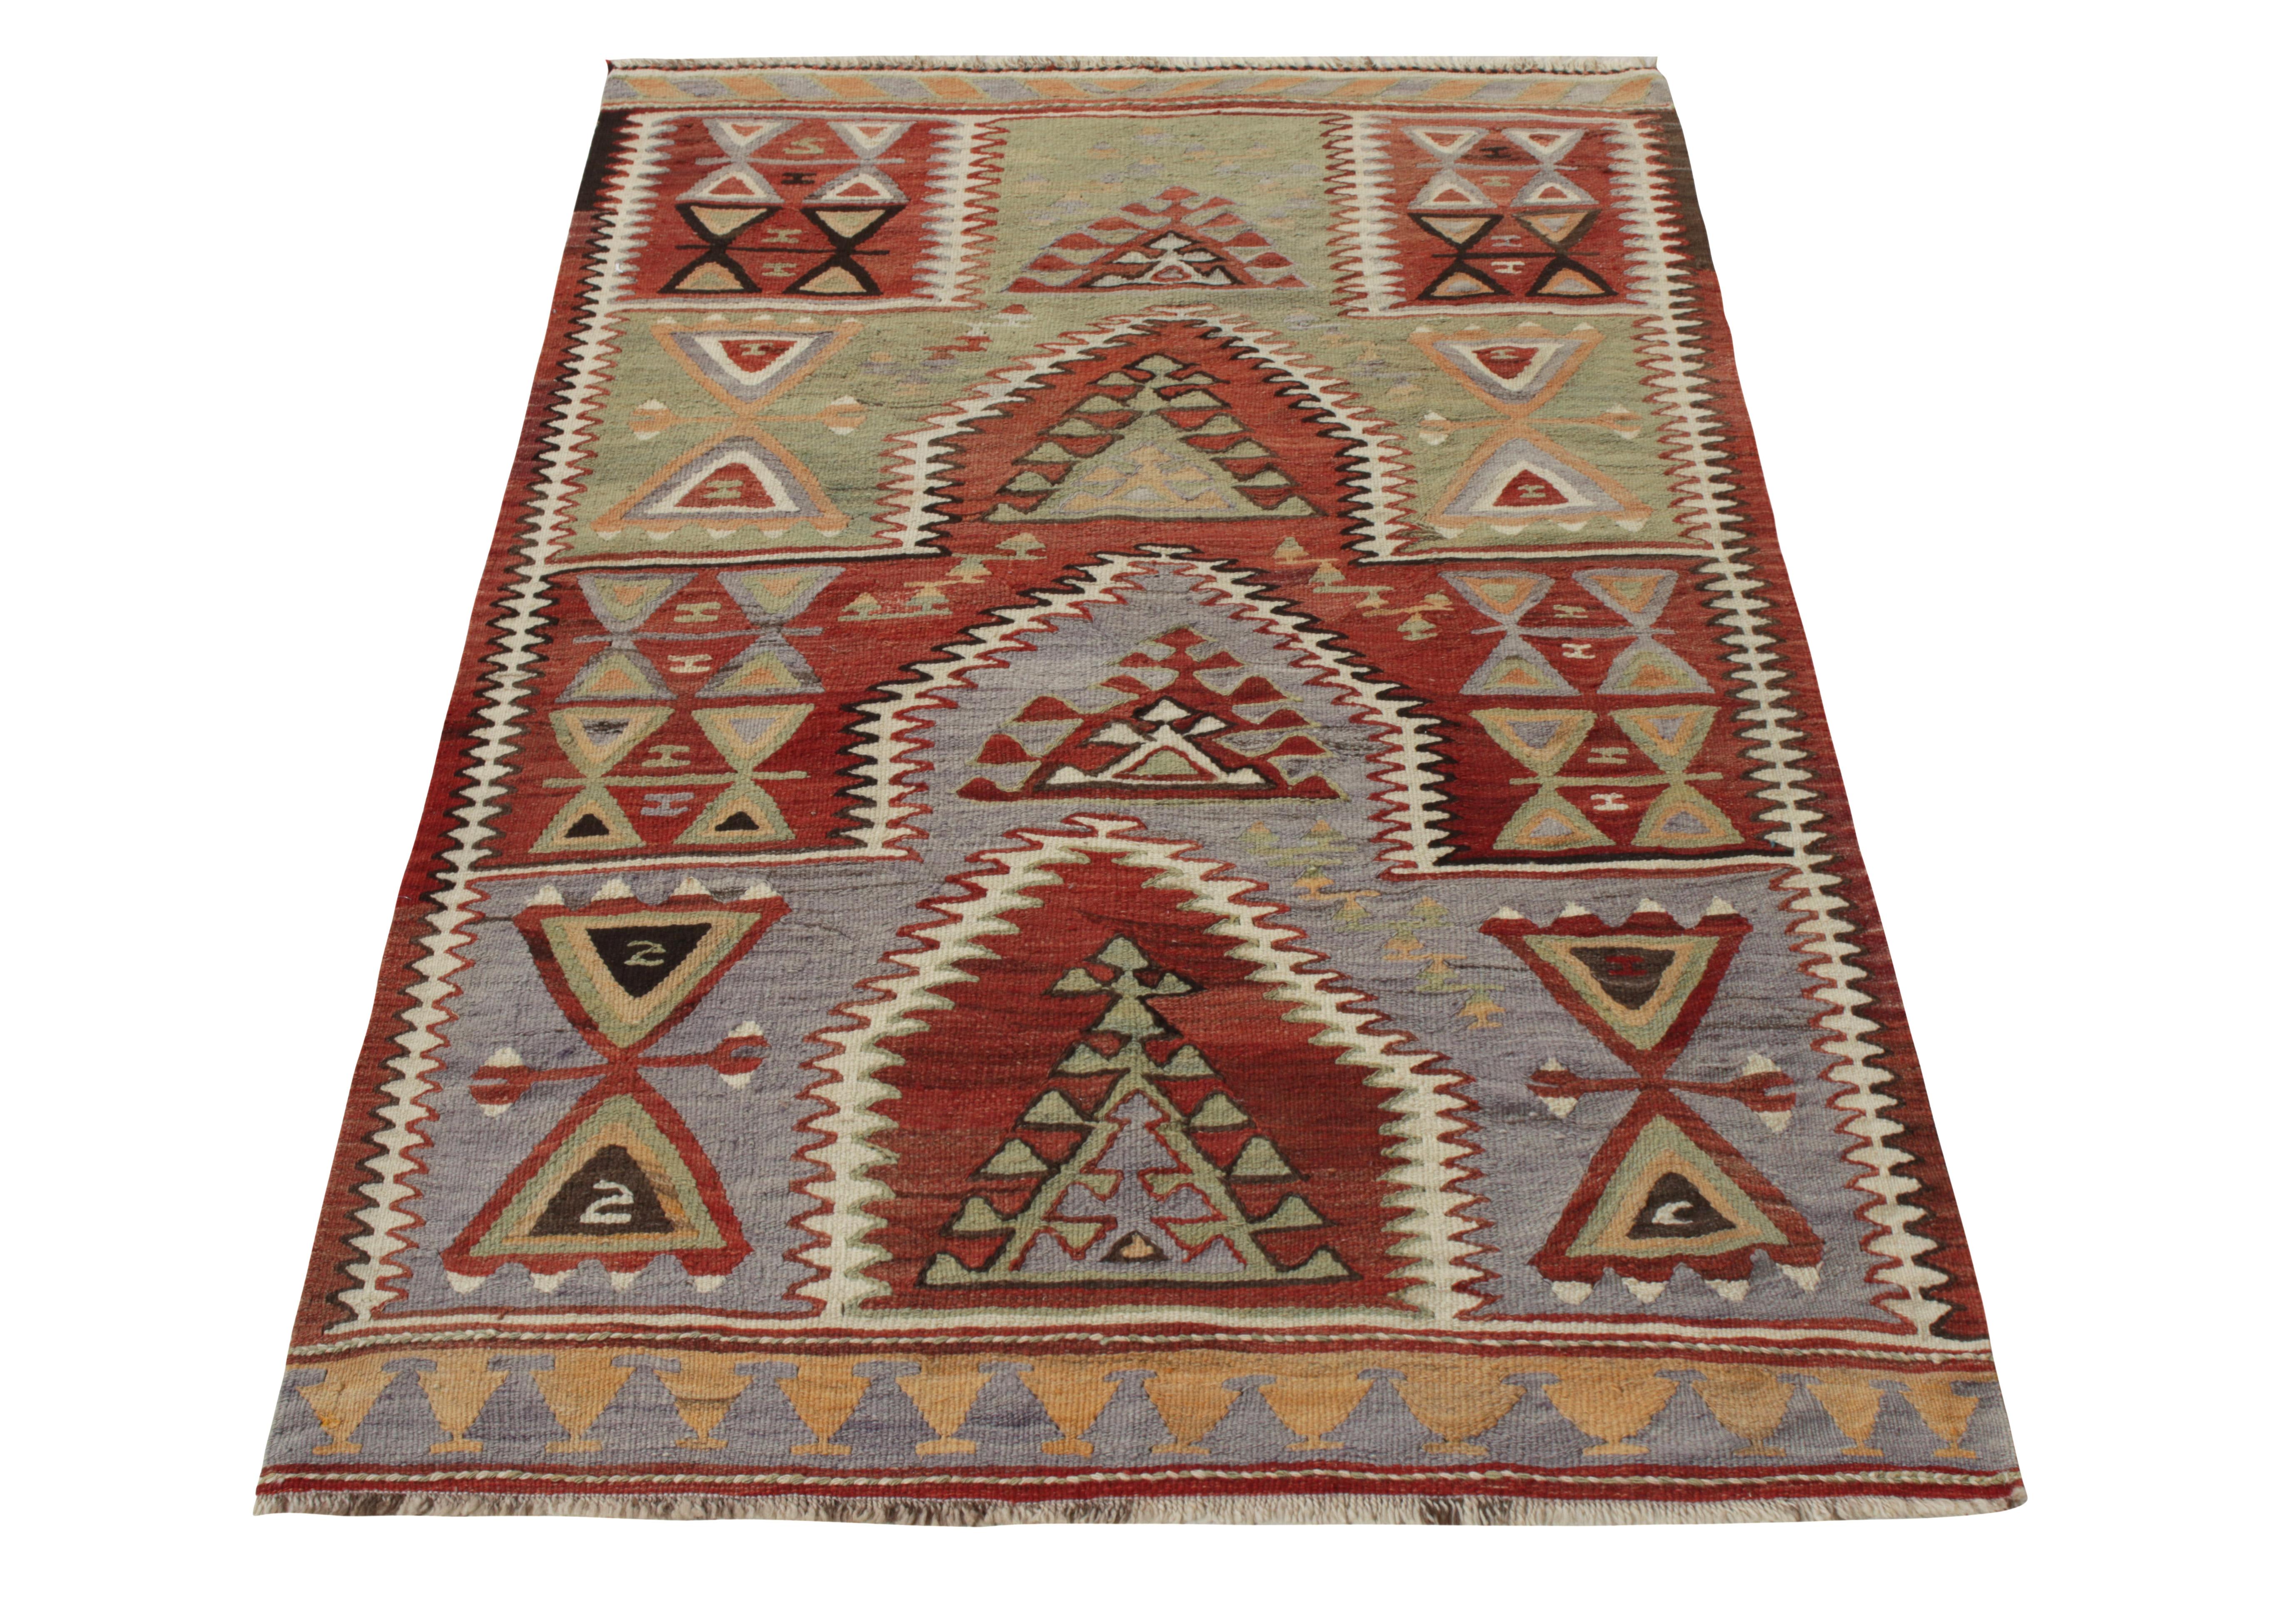 Handwoven in wool circa 1980-1990, a vintage 1980s Turkish Kilim from tmaking way to Rug & Kilim’s coveted classic flatweave collection. Spanning across a 4x6 scale, the piece enjoys a dexterous geometric pattern with motifs covering both the field